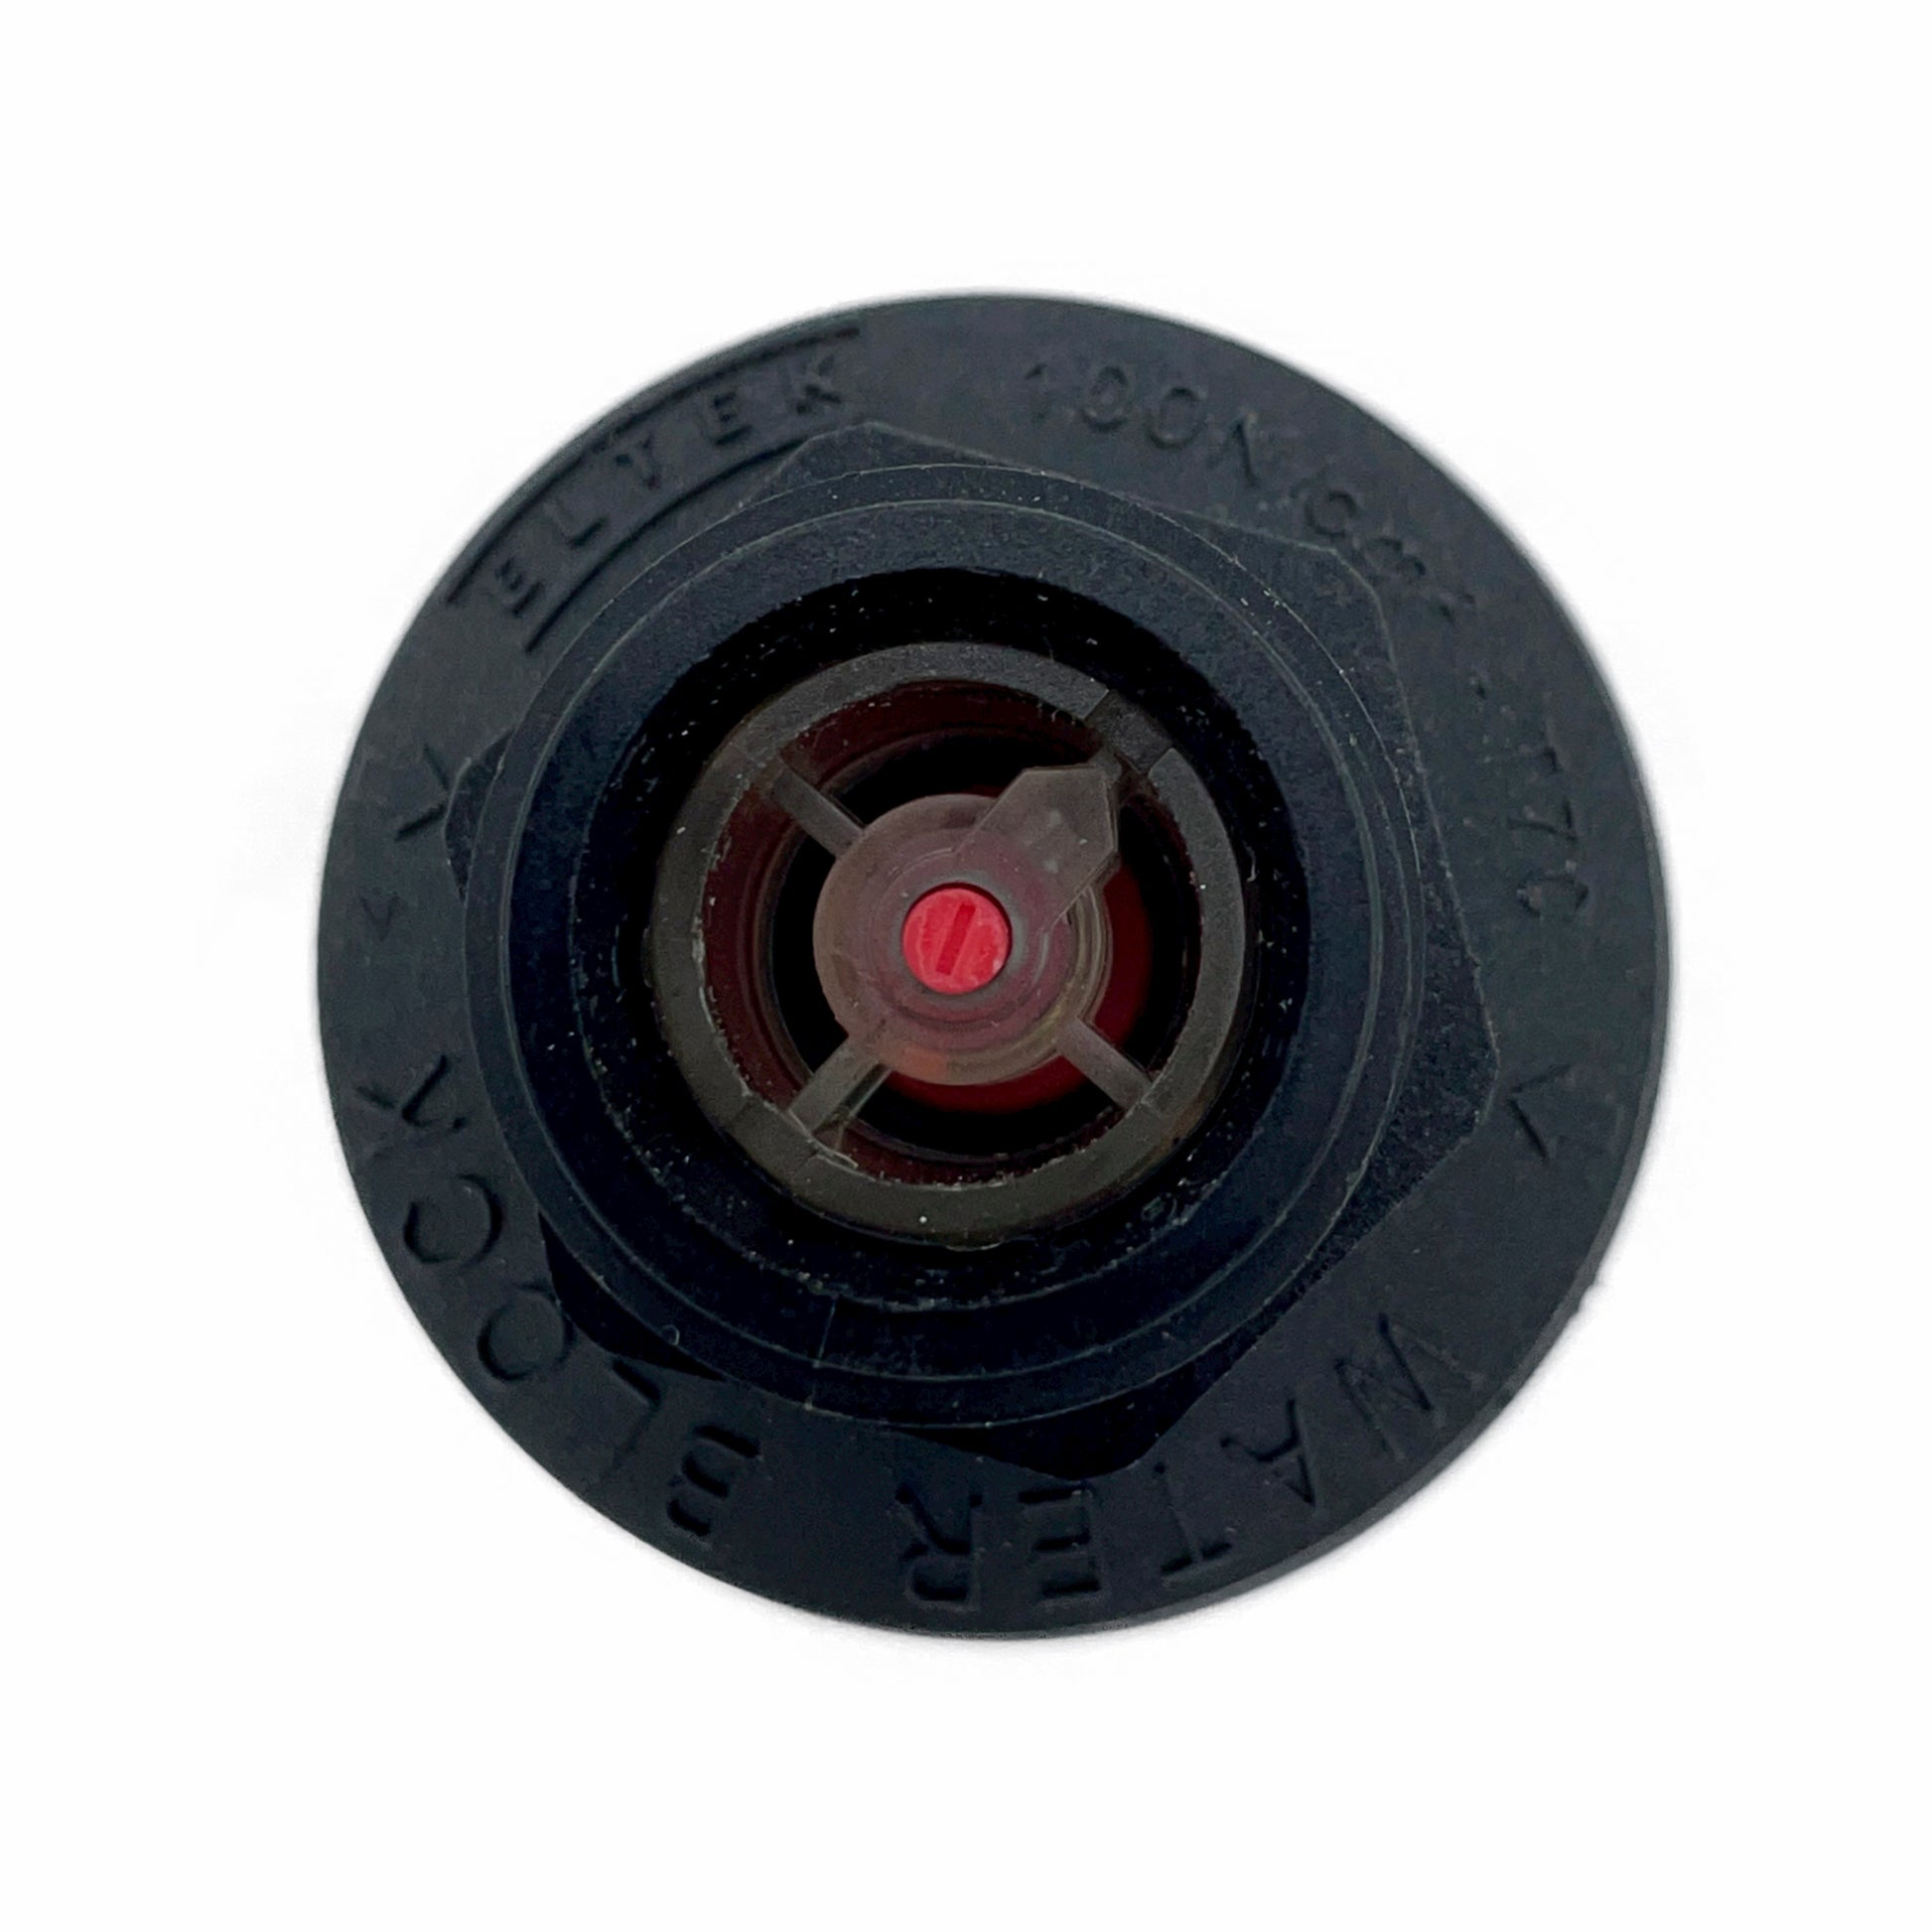 The settings dial on the Eltek mechanical Water Block. 10 setting notches with each setting being +1.3 gallons. Turn the dial clockwise to increase shutoff volume threshold or counter clockwise to lower the water volume shutoff threshold. The arrow indicates current setting. The red center pin is used to reset the device and resume flow.